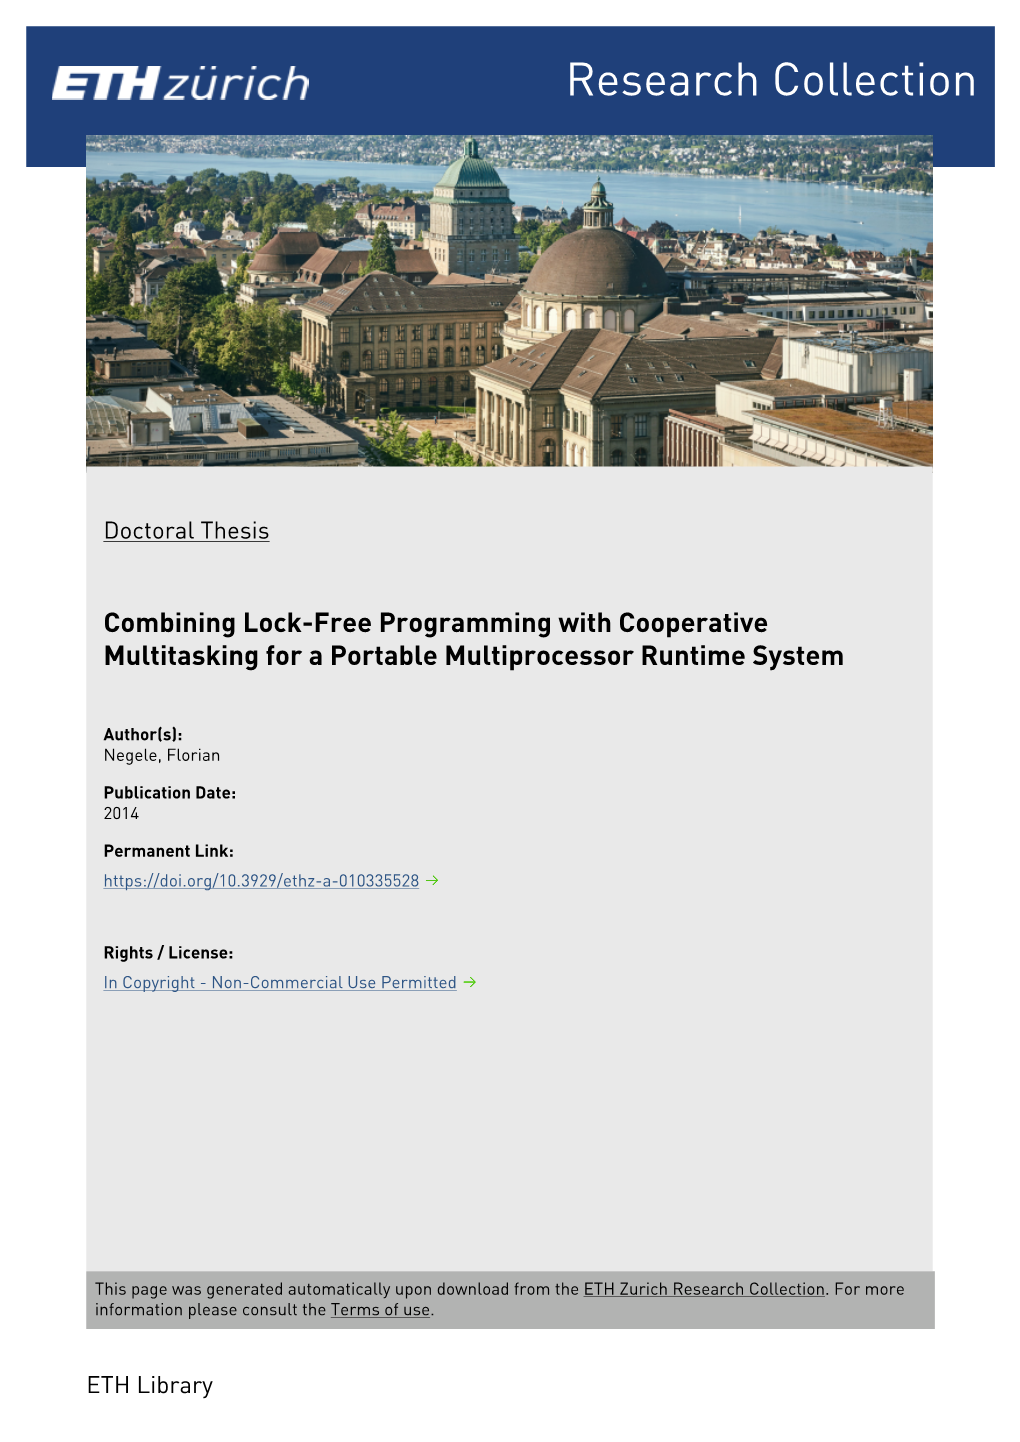 Combining Lock-Free Programming with Cooperative Multitasking for a Portable Multiprocessor Runtime System